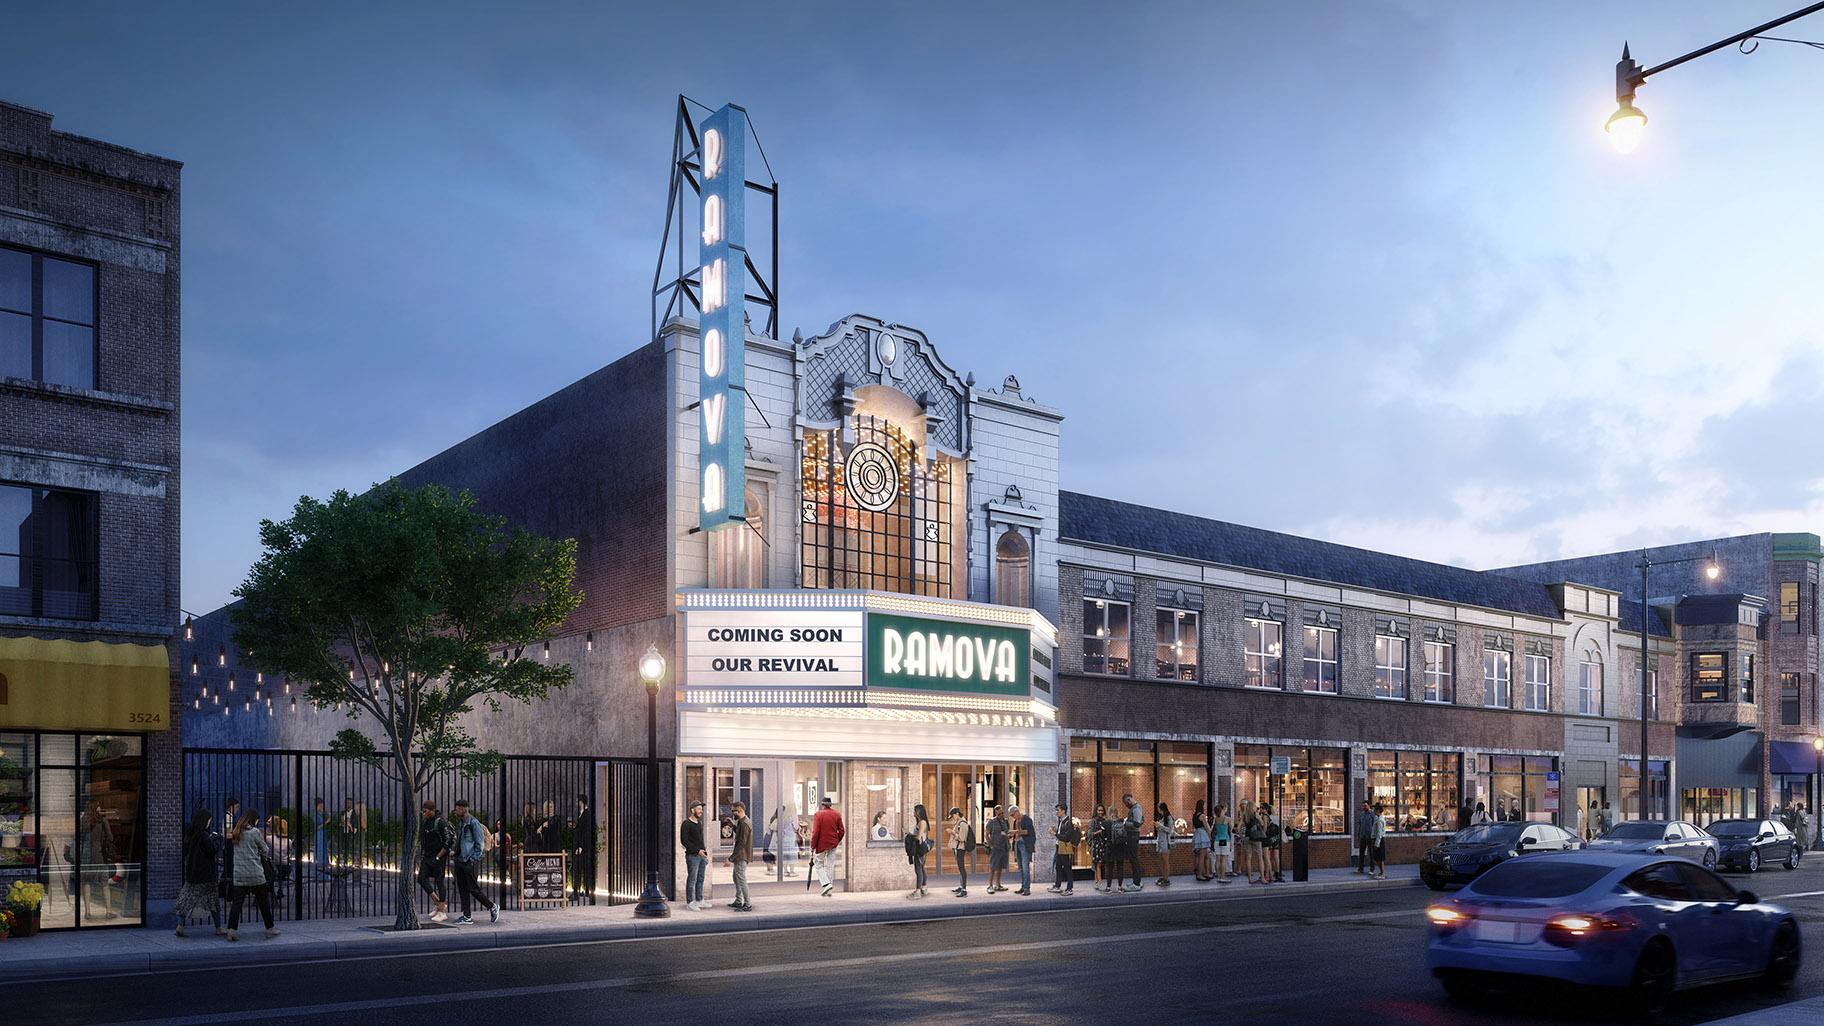 A rendering of the proposed renovation of the Remova Theatre in Bridgeport. (Credit O’Riley Office LLC)